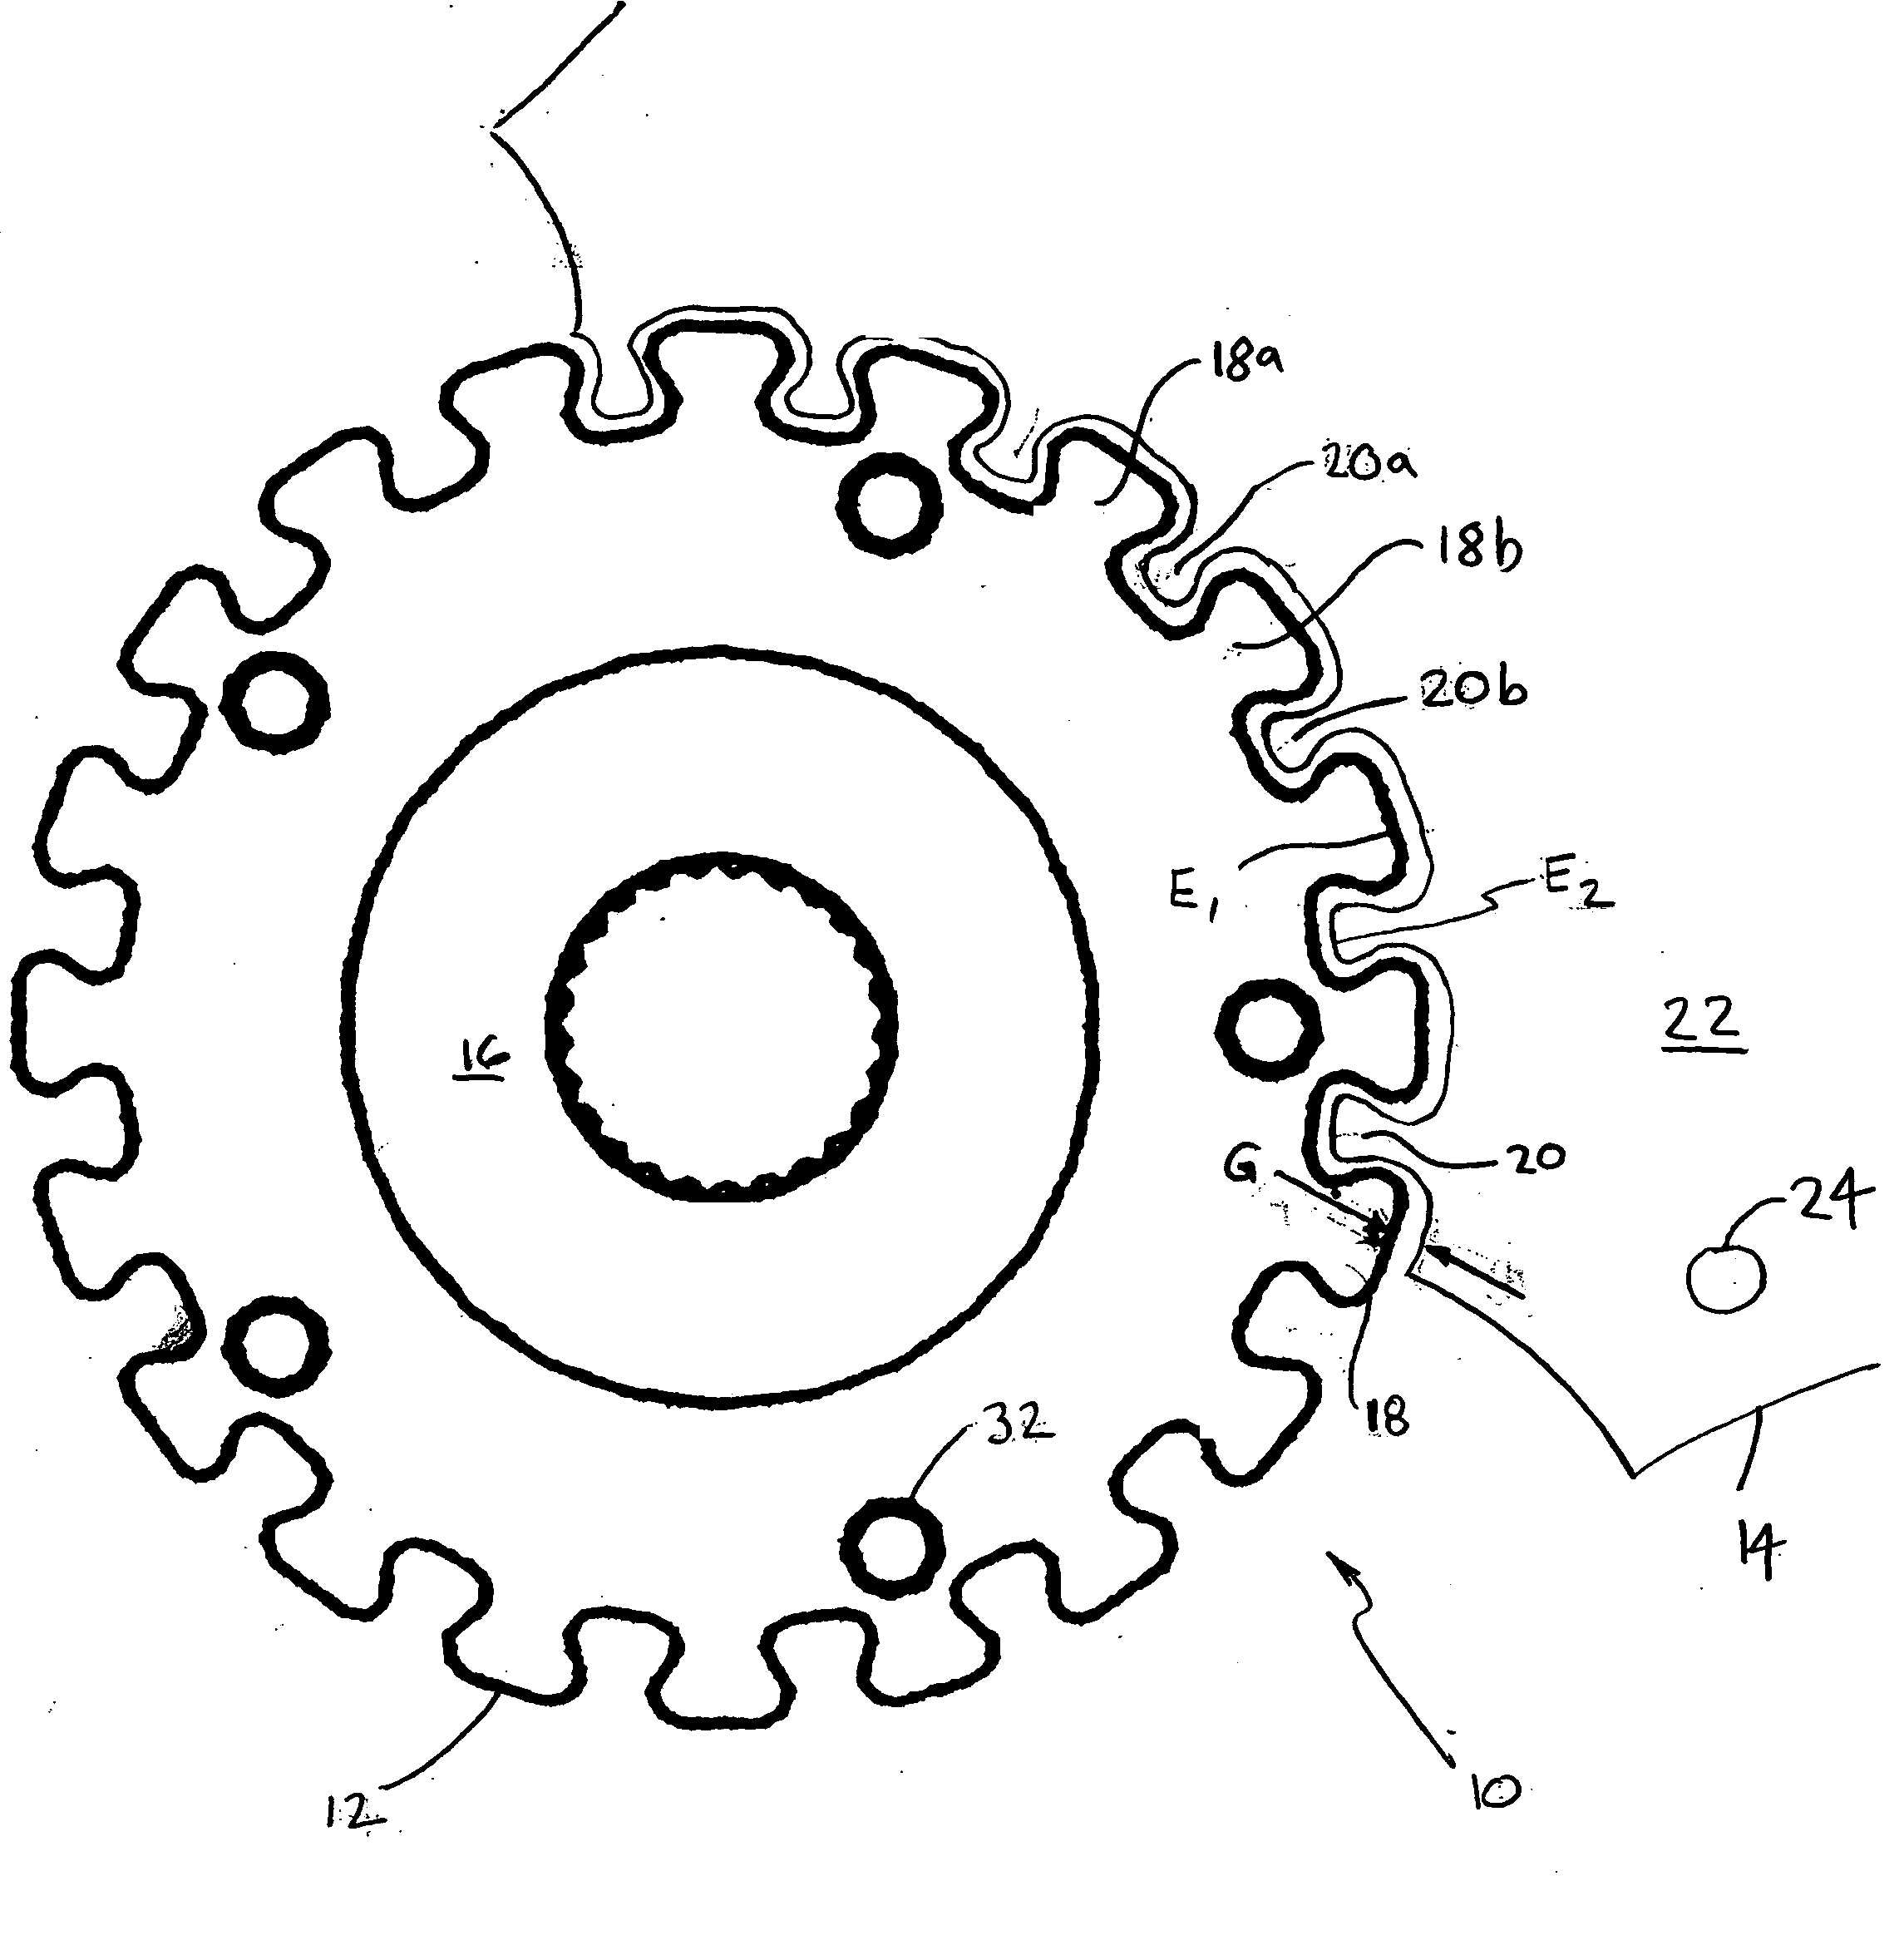 Floating disc brake assembly with interlocking hub and rotor